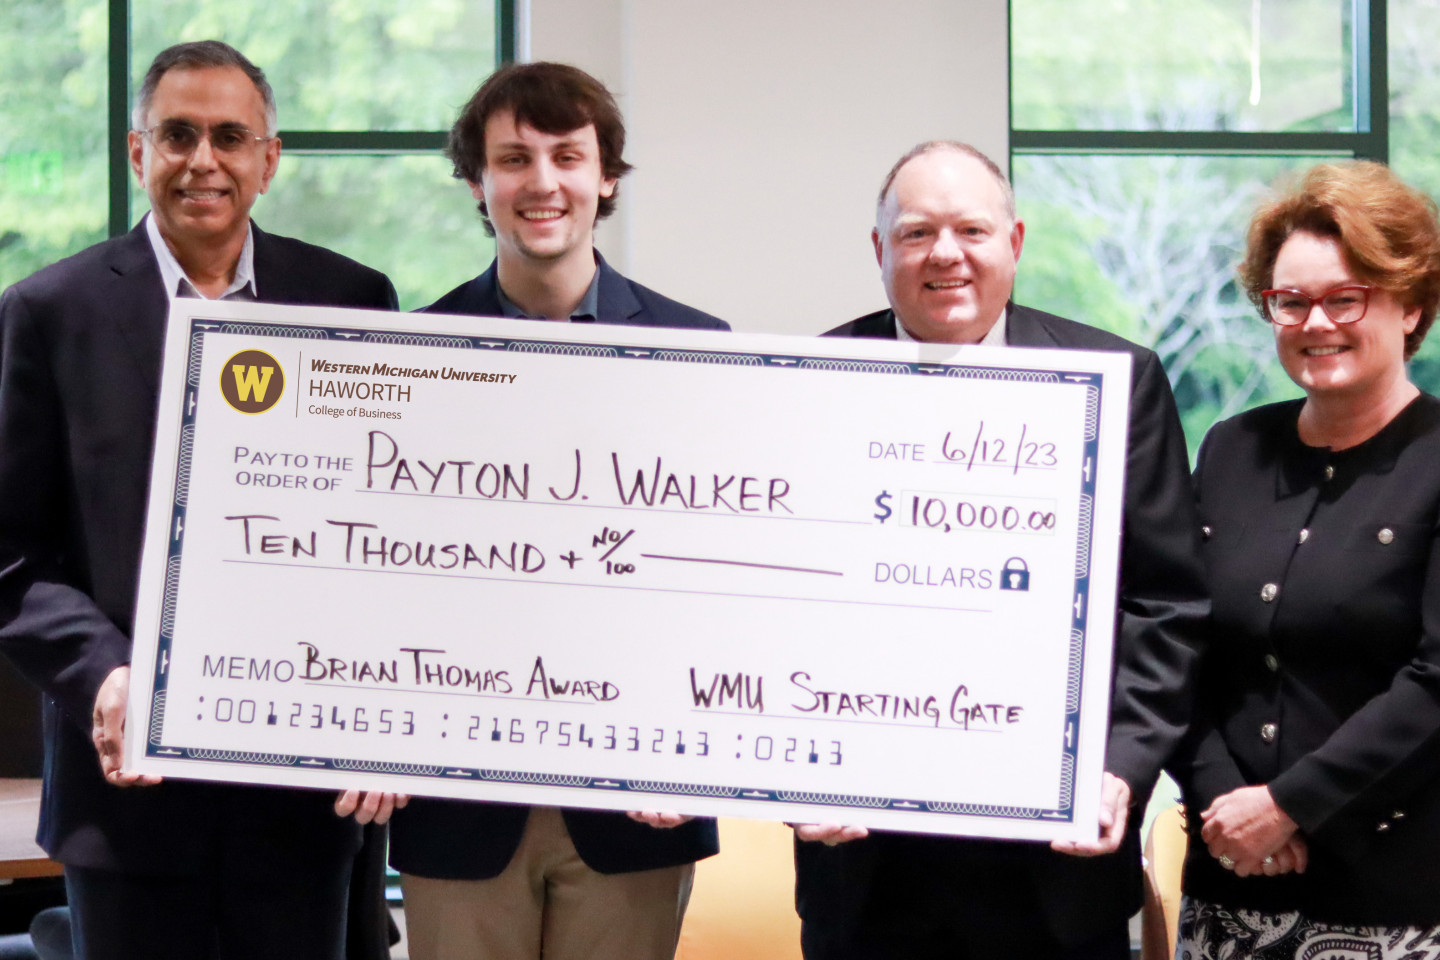 Payton Walker accepts $10,000 award with Dean Satish Deshpande, Dr. Decker Hains, chair of the Department of Management, and Tamara Davis, director of Staring Gate